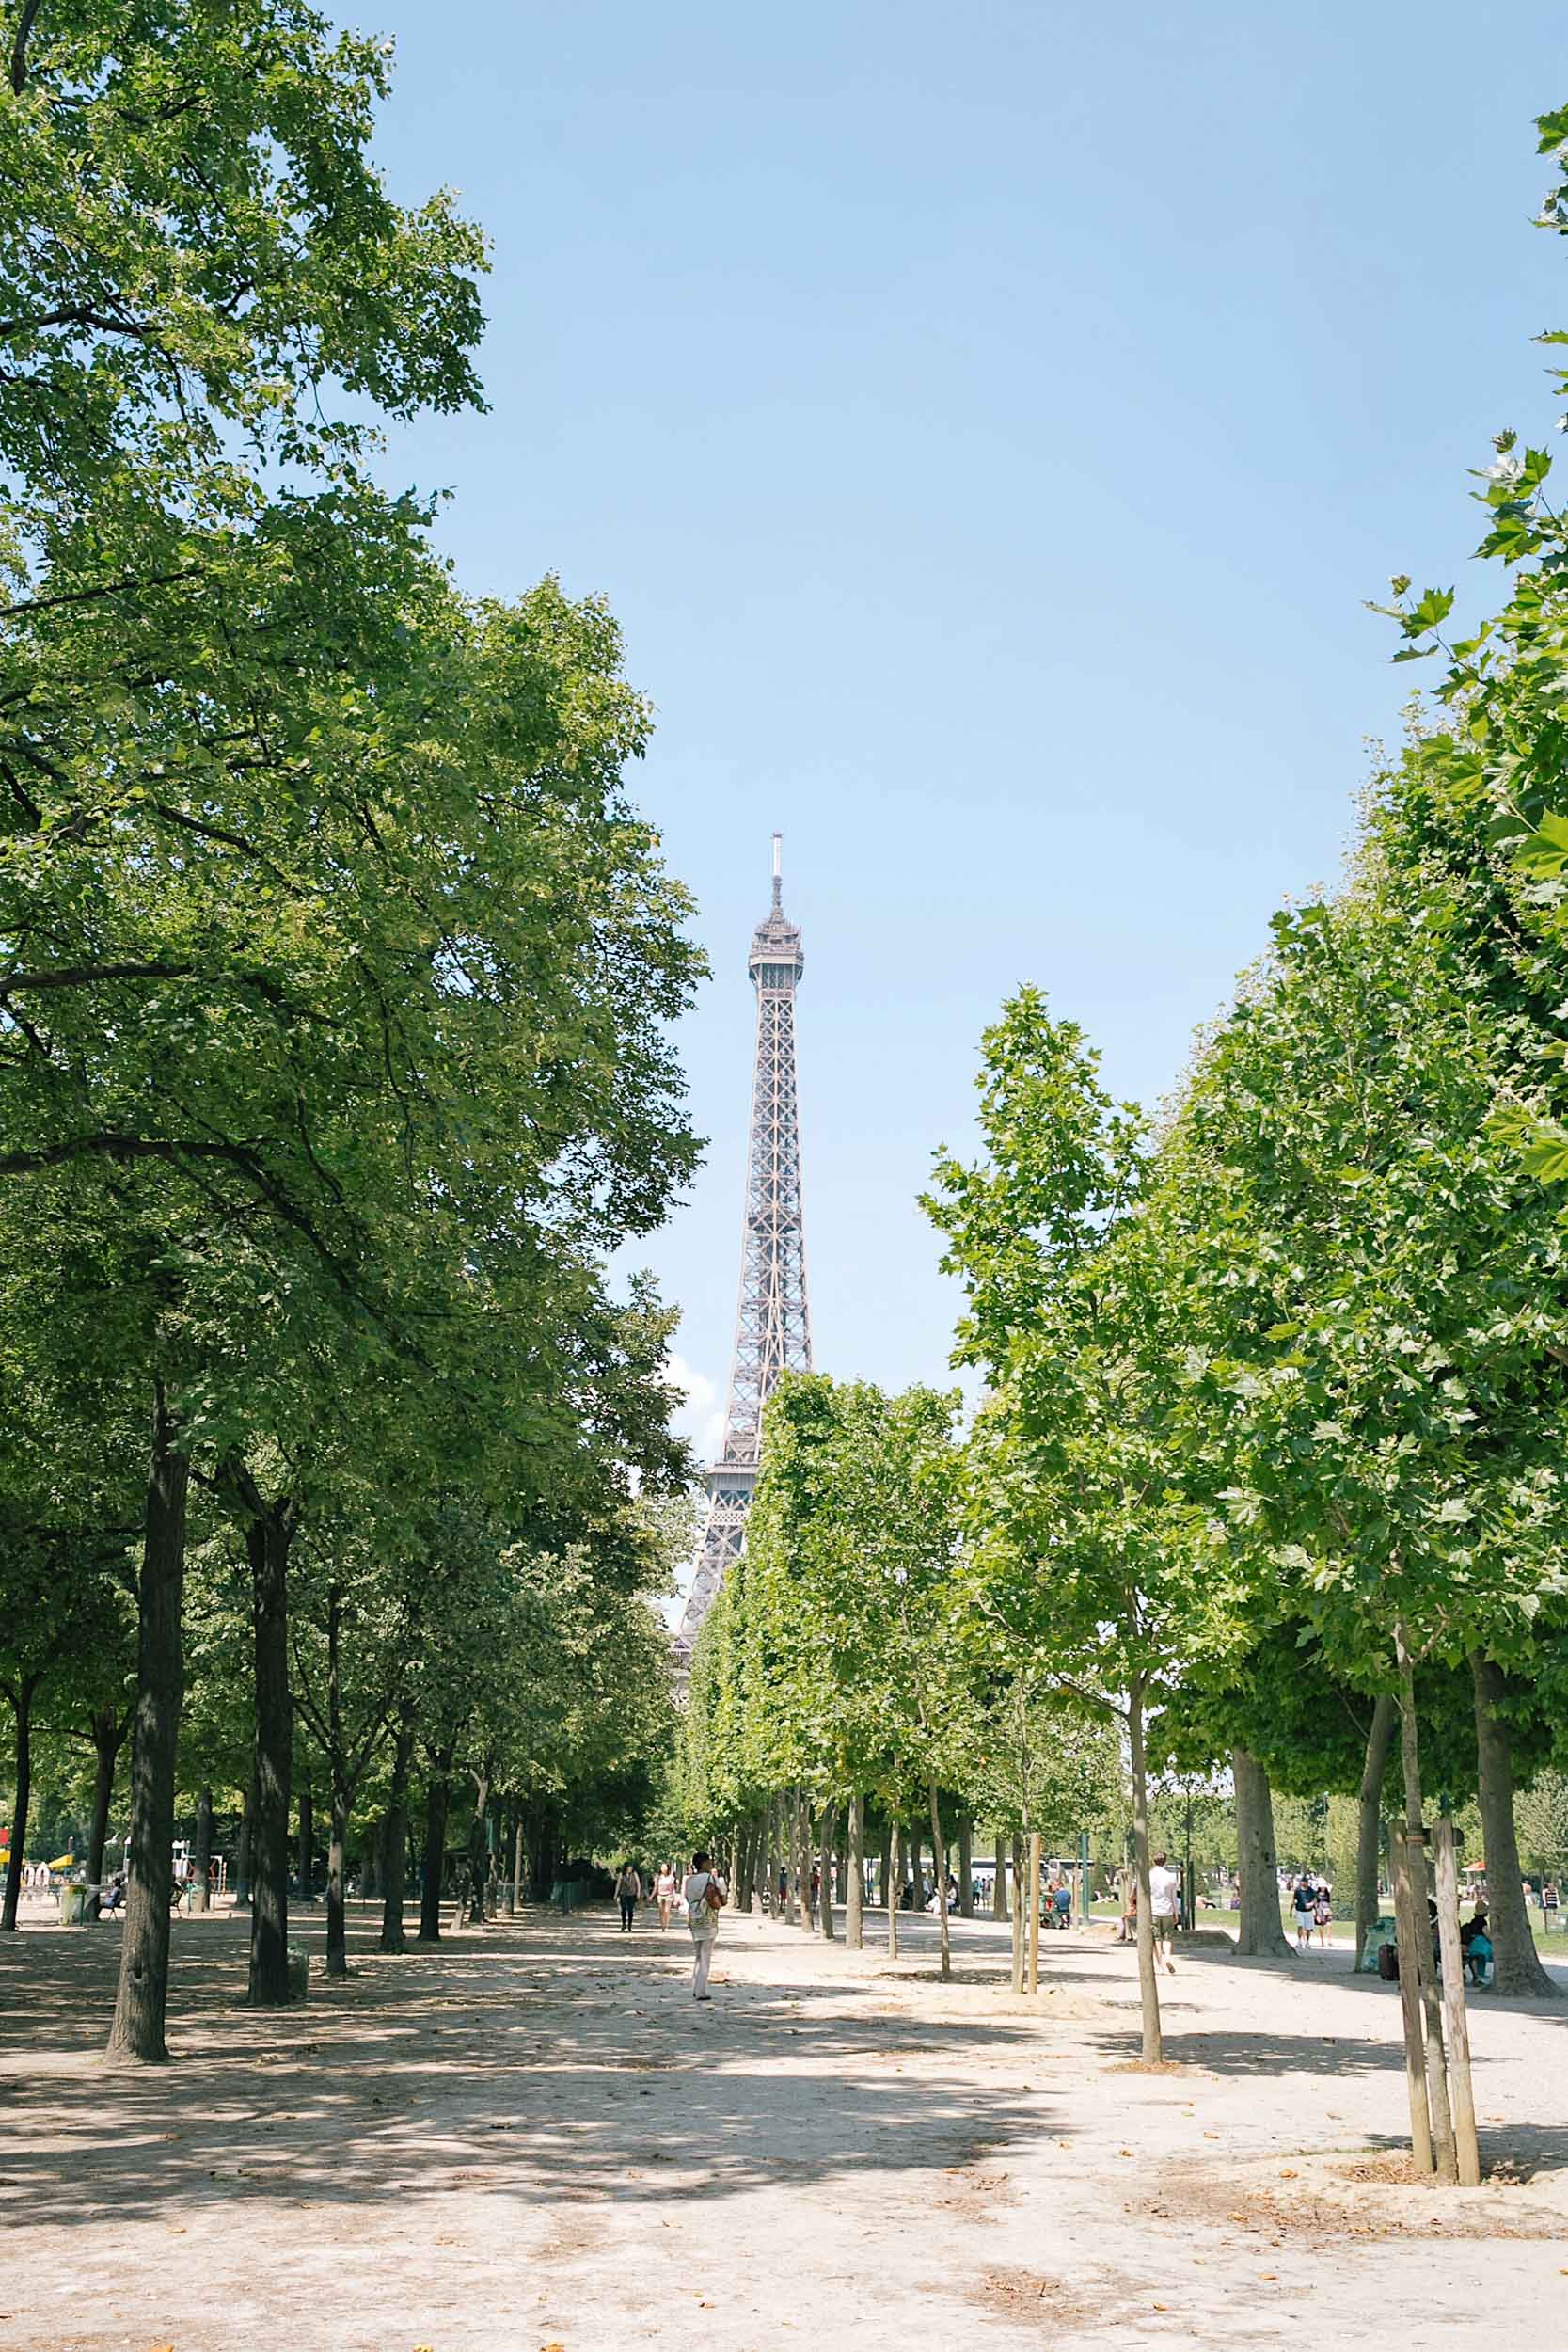 Summer is arguably the most beautiful and lively time of year in Paris